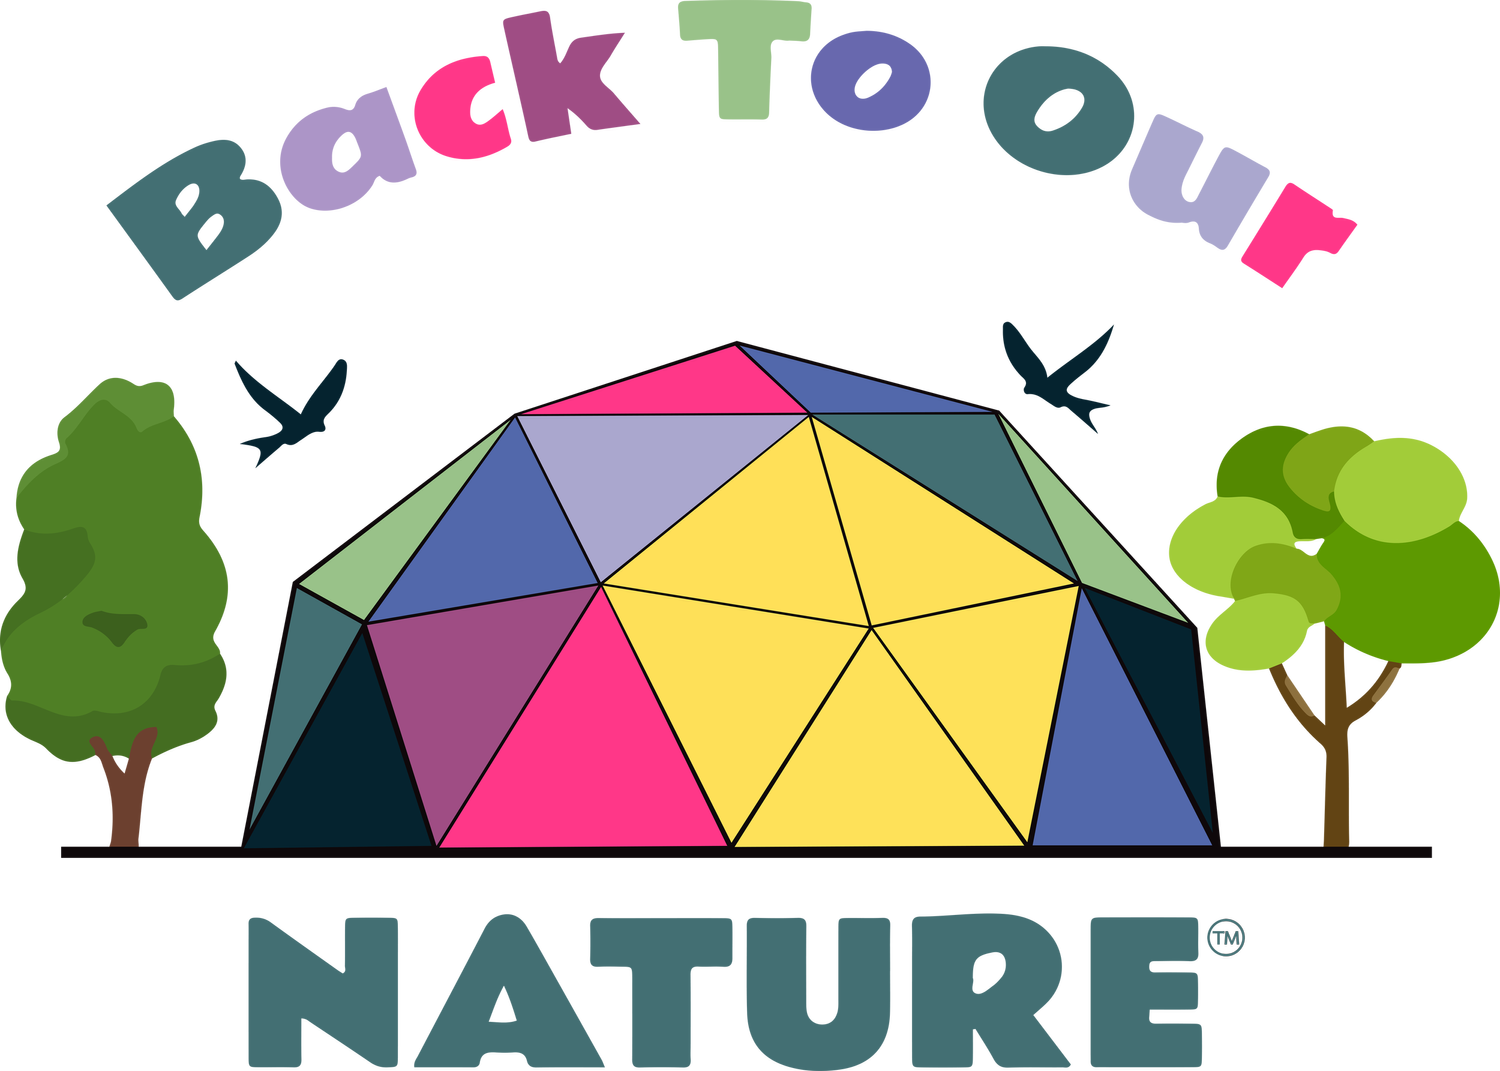 Get Back to our Nature